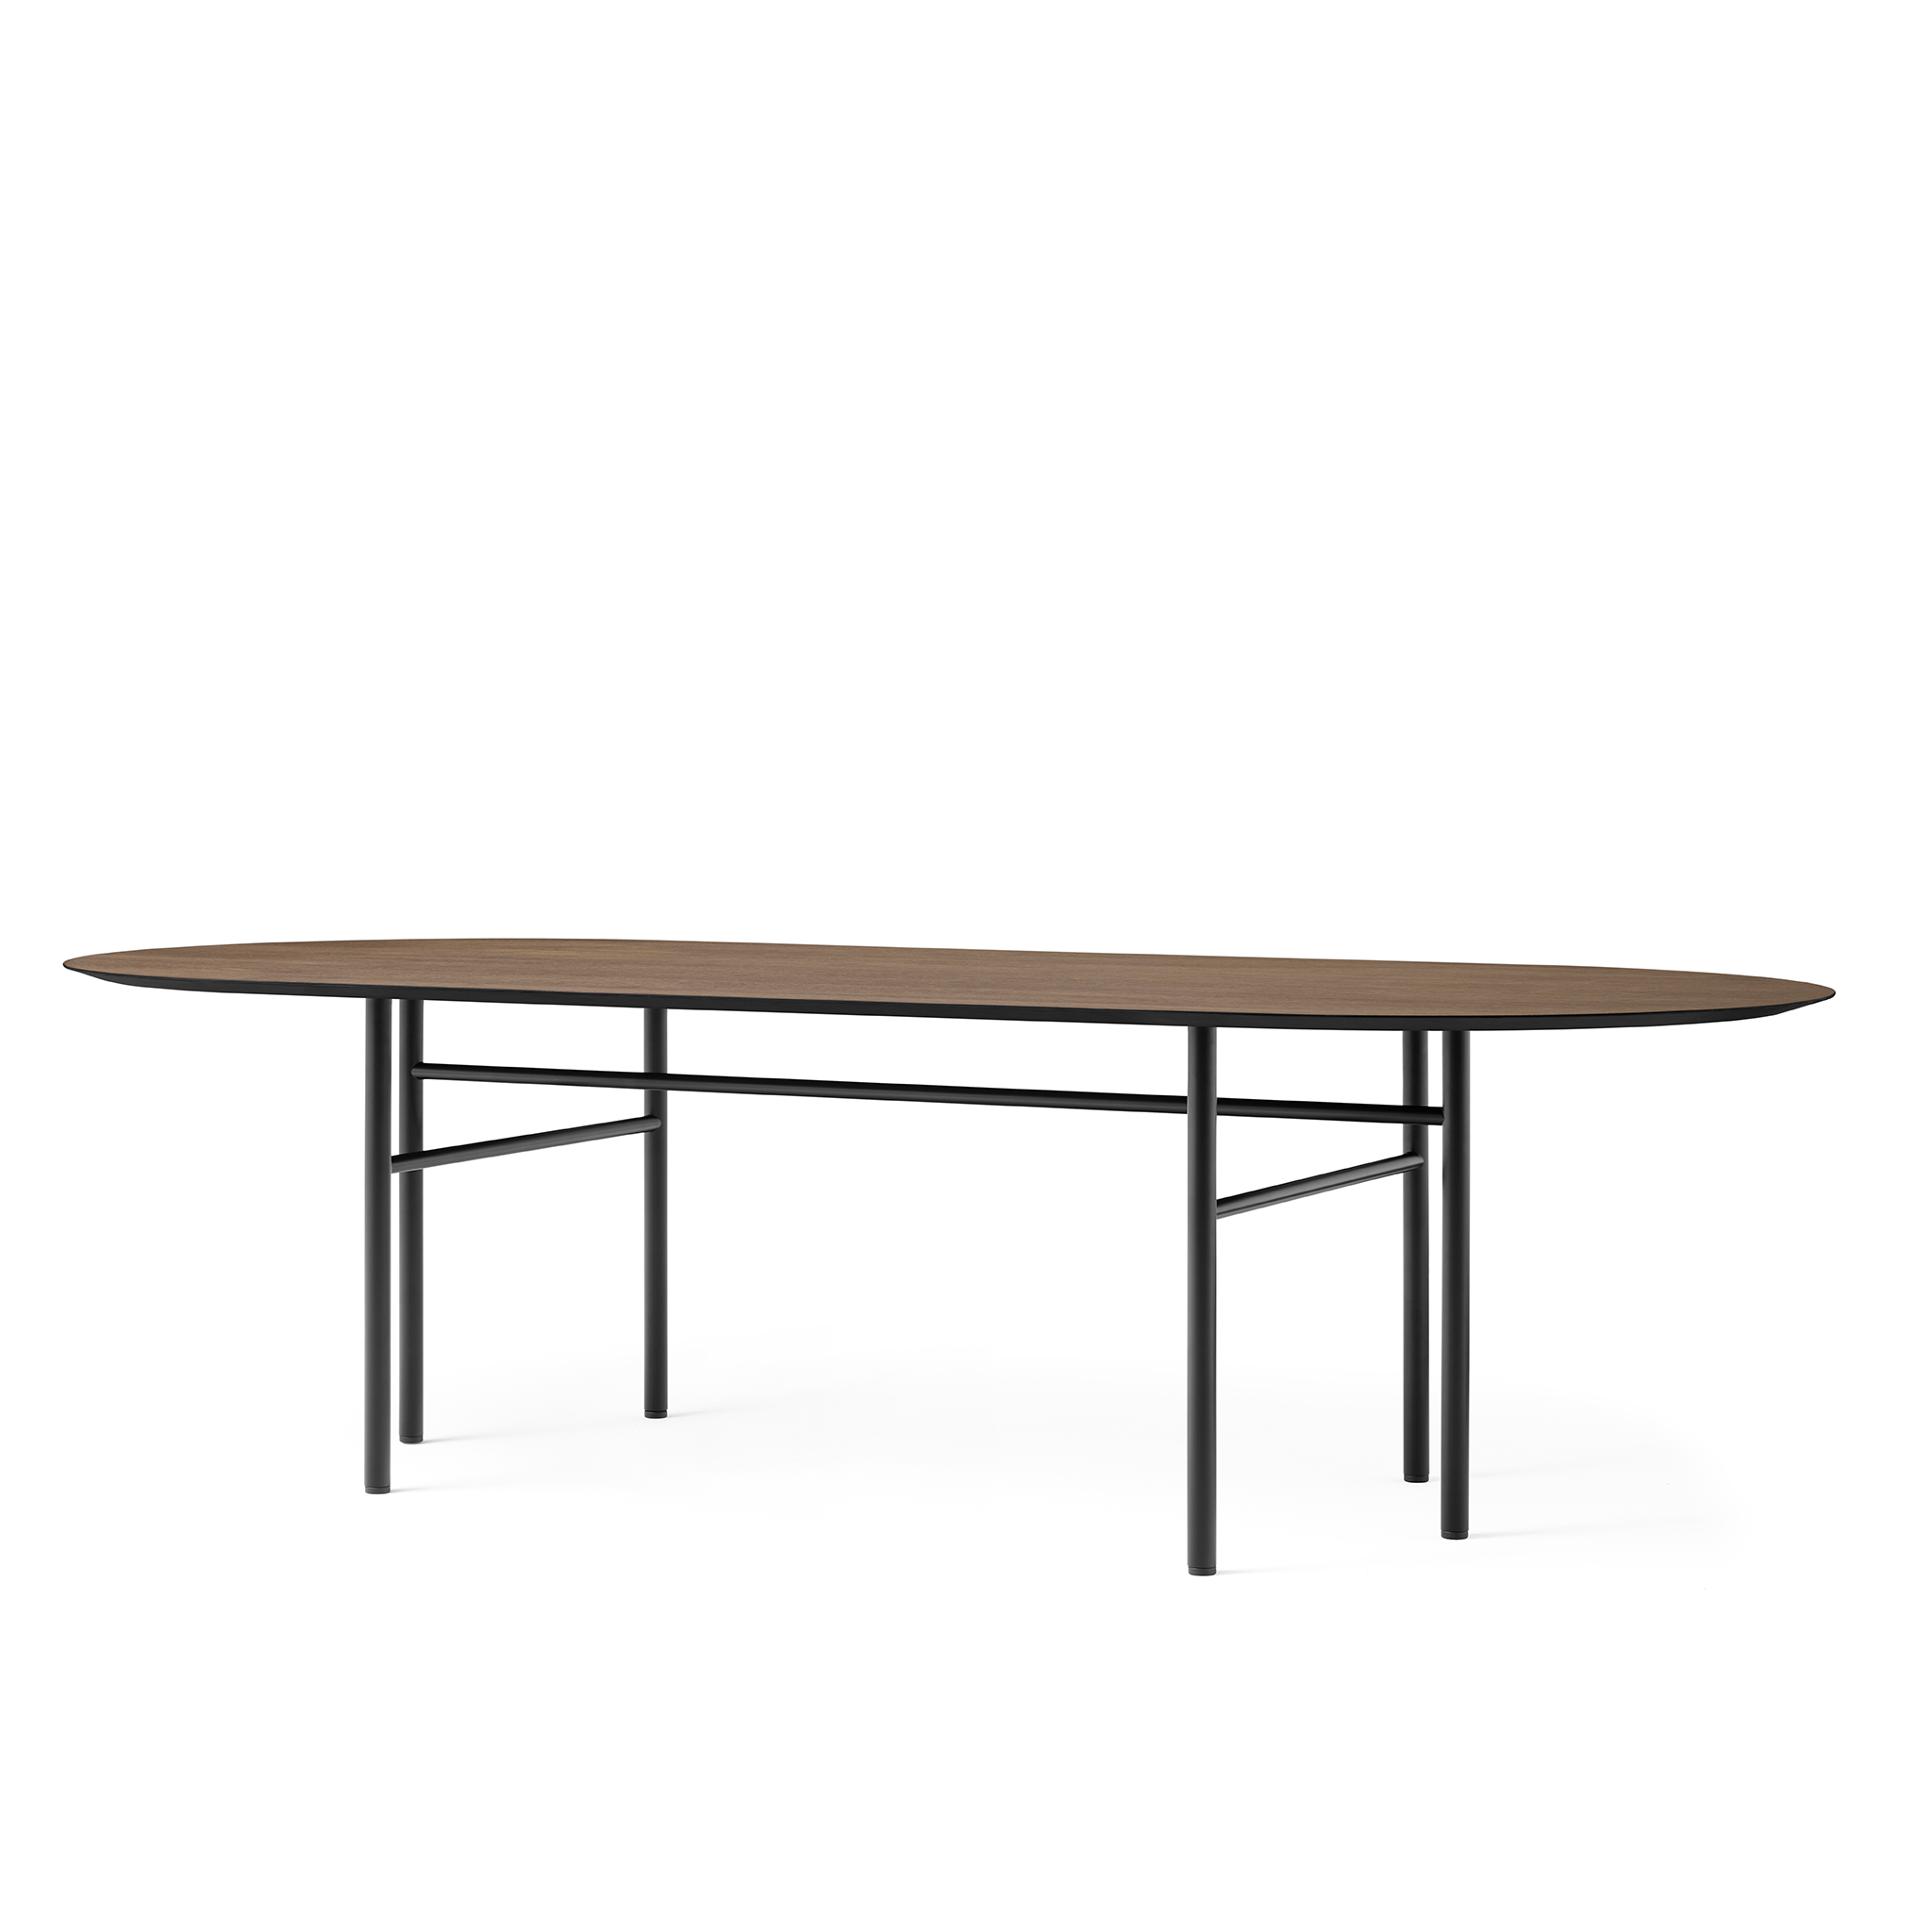 Snaregade Table Oval by Norm Architects